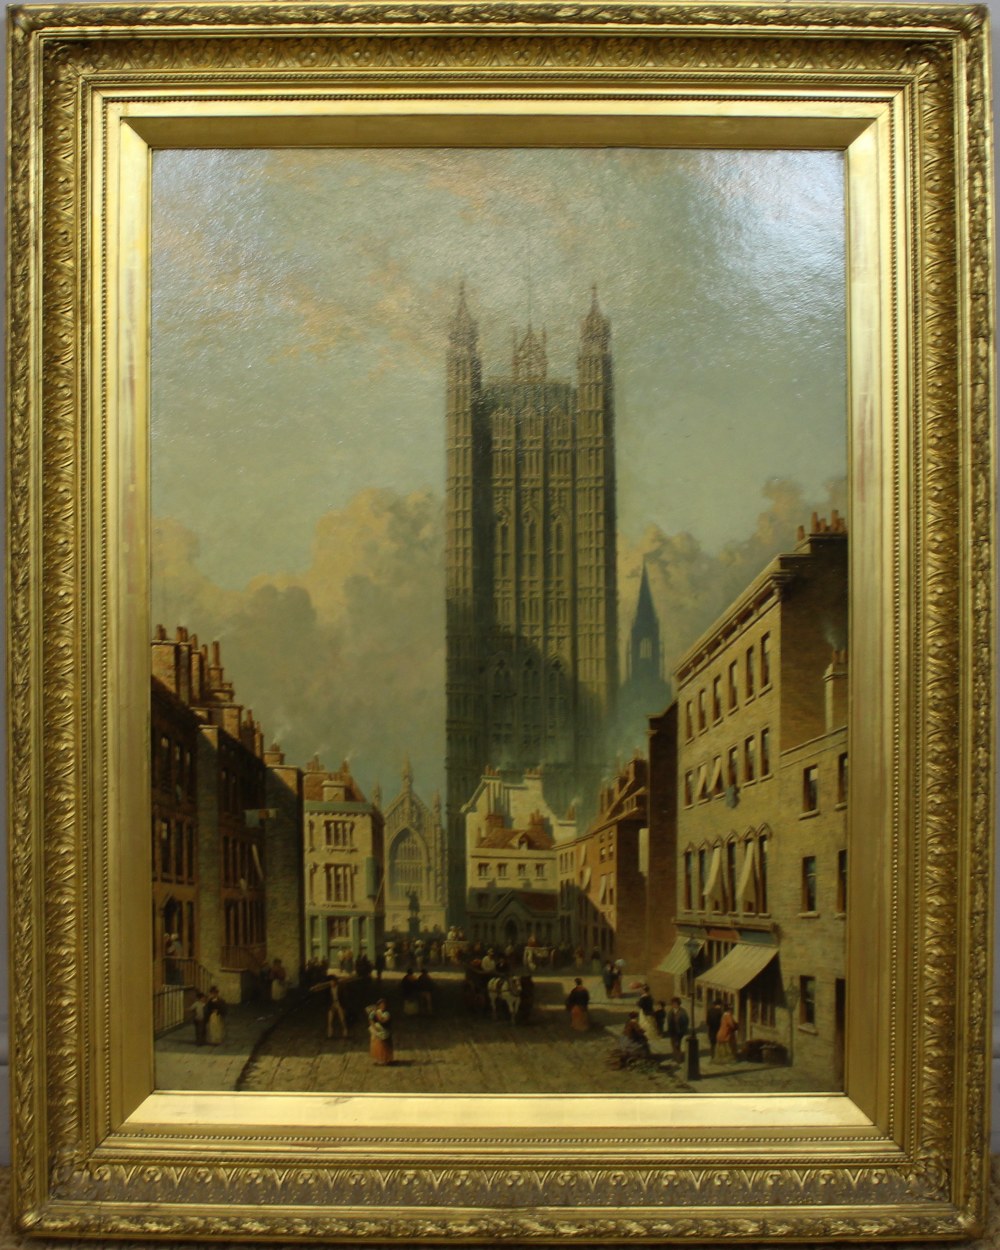 John Burbidge (fl. 1855-1894) - Oil painting - 'Victoria Tower, Westminster from Old Millbank